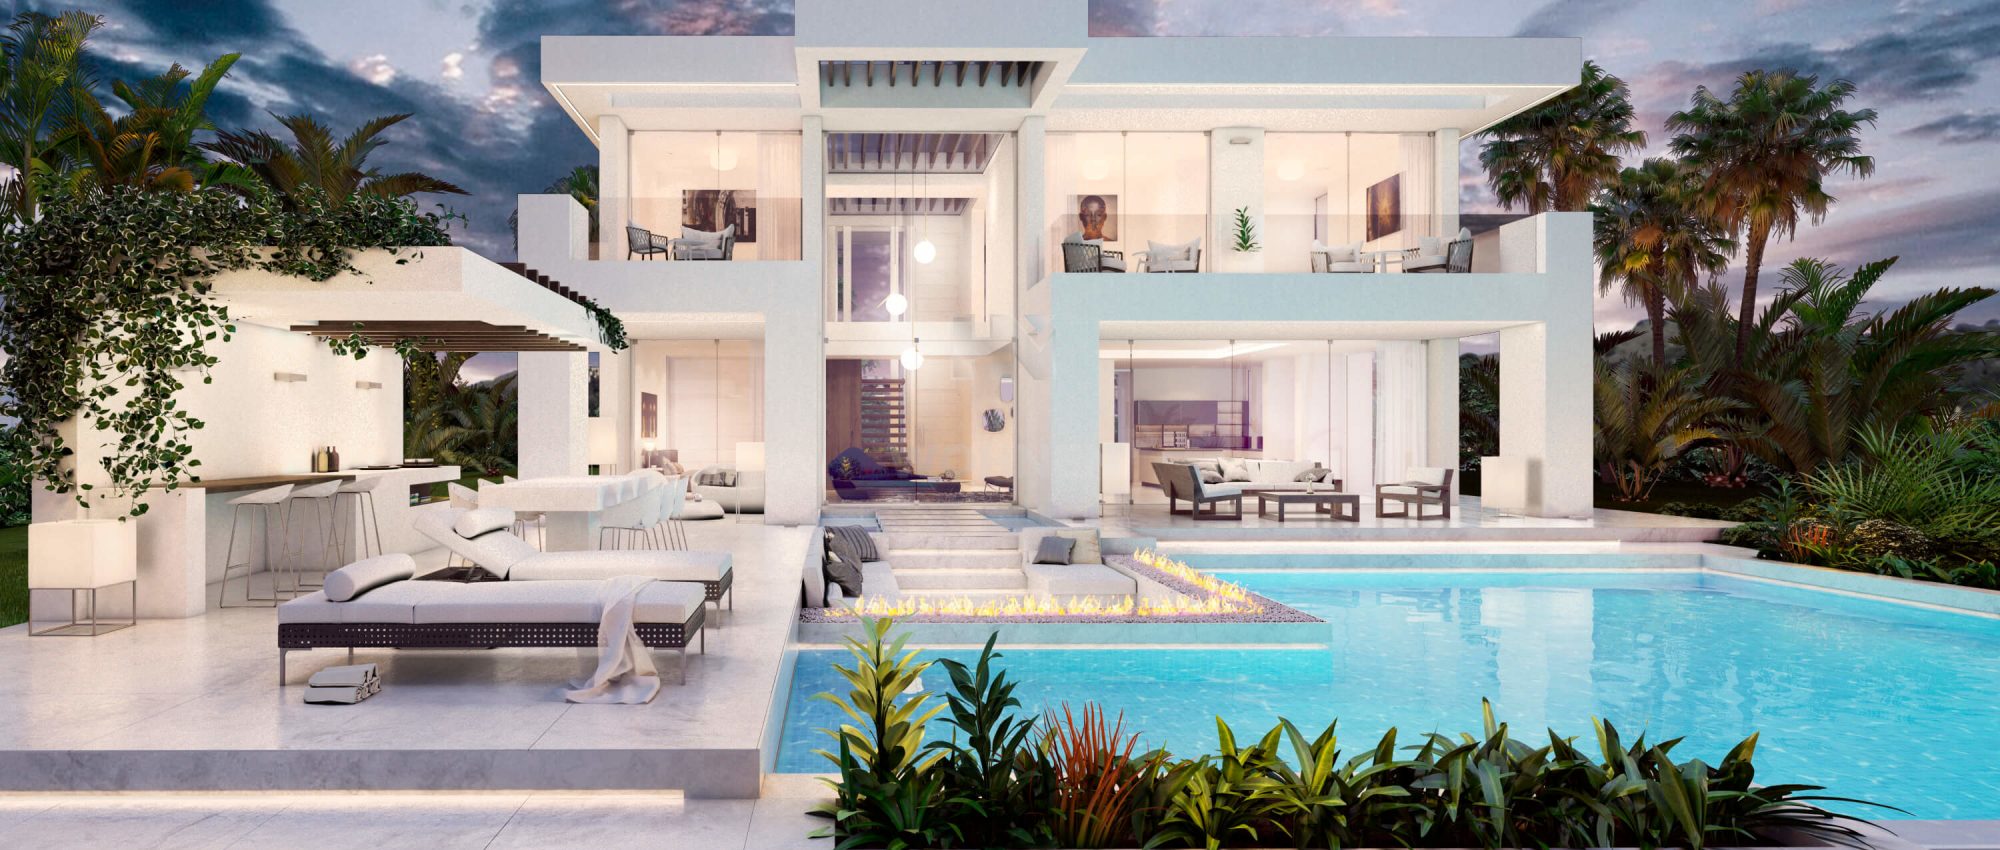 Riviera  is an off plan project of a single villa with a modern and exclusive design